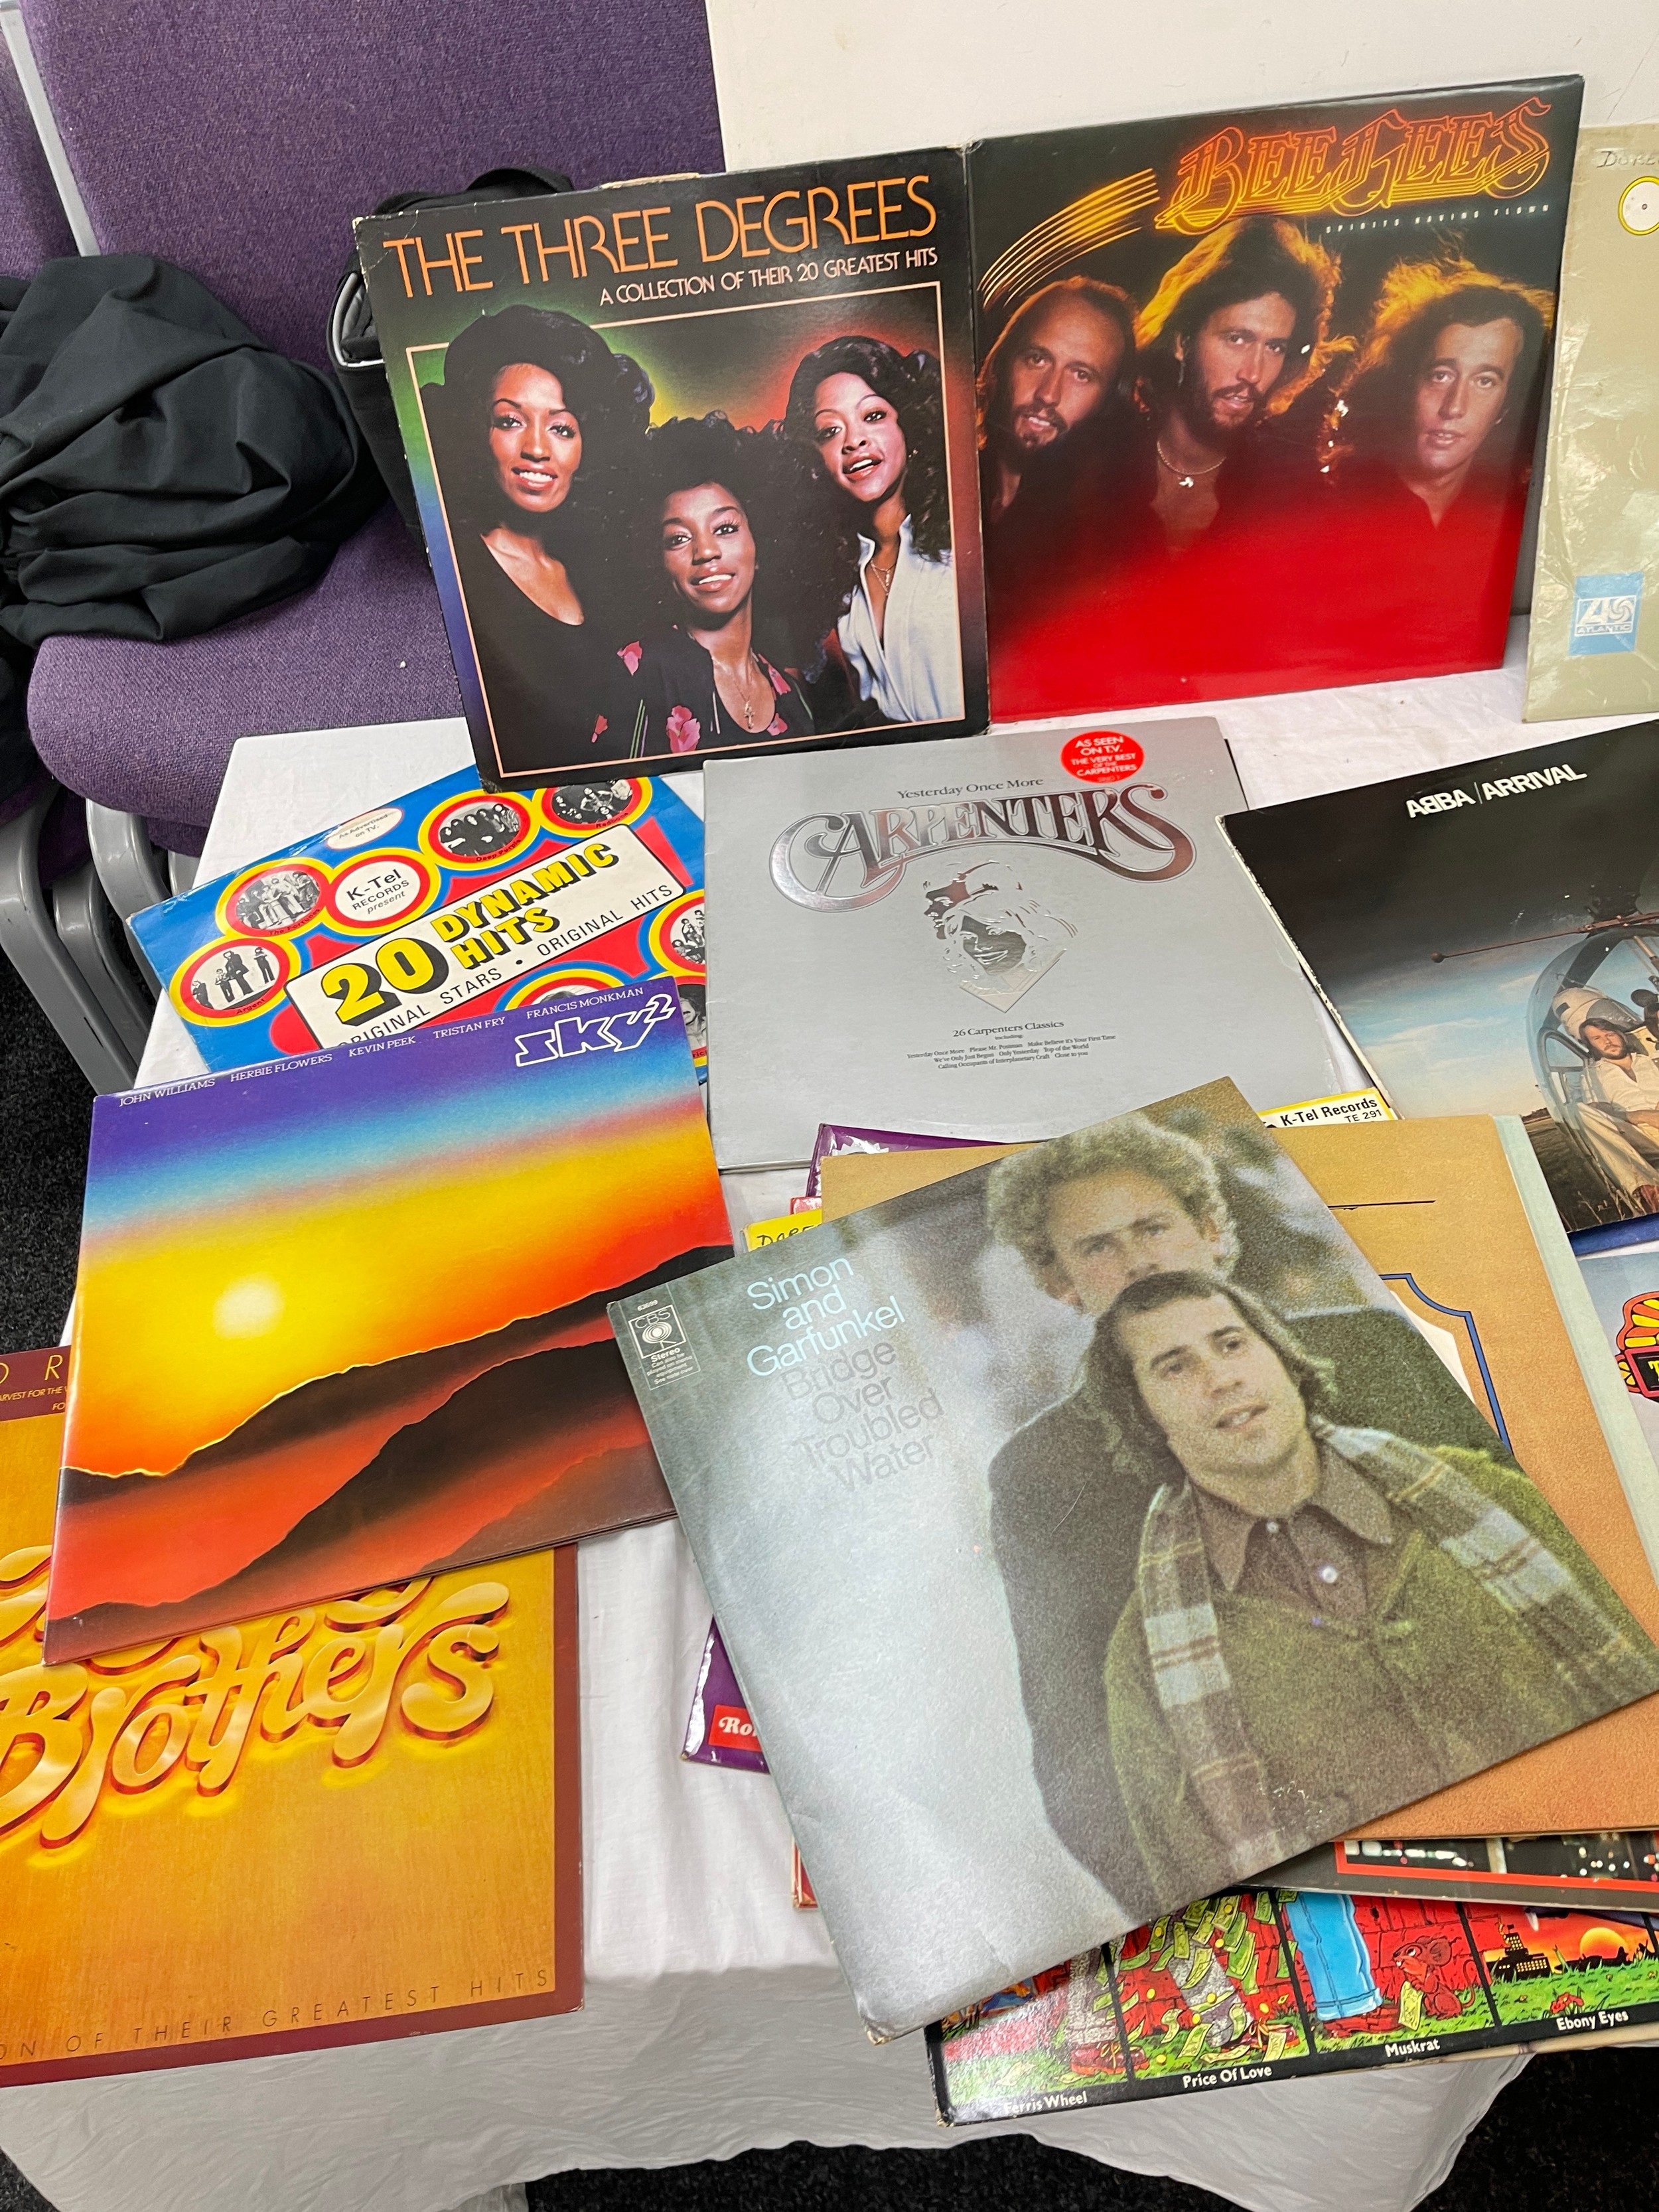 Selection of records includes Bee gees, otis rodding, living legends, abba etc - Image 2 of 4